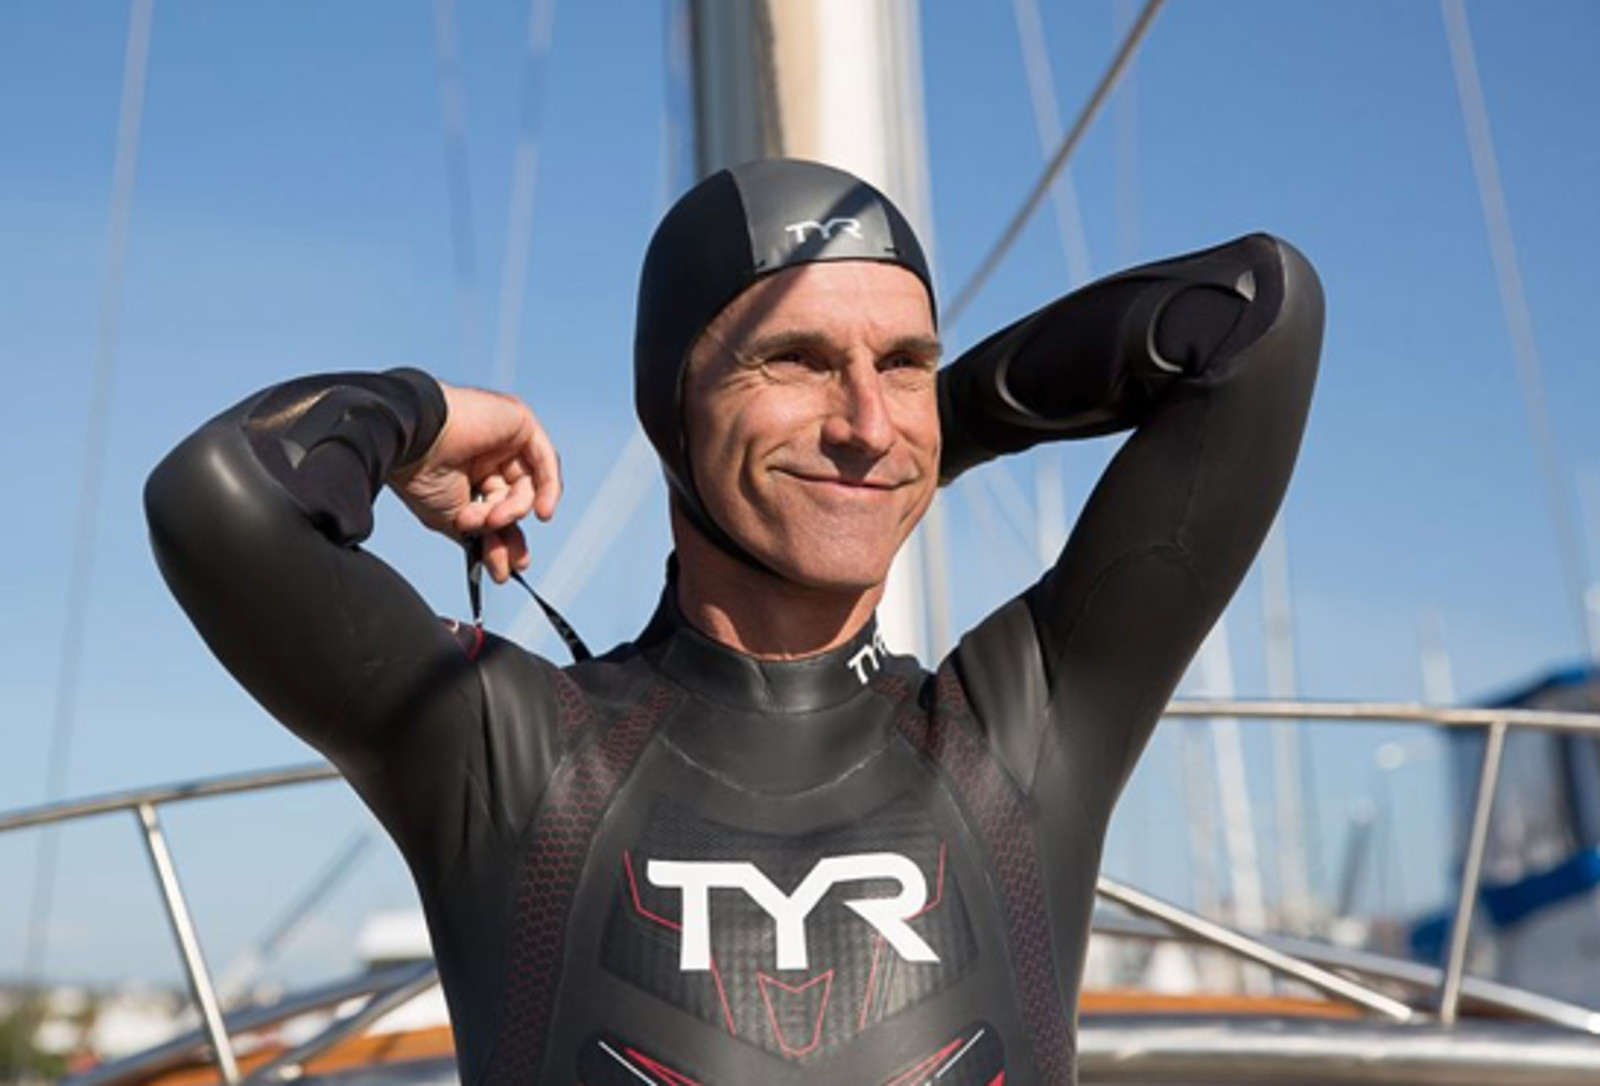 This Man Is Attempting to Swim From Tokyo to San Francisco to Raise Awareness for Plastic Pollution